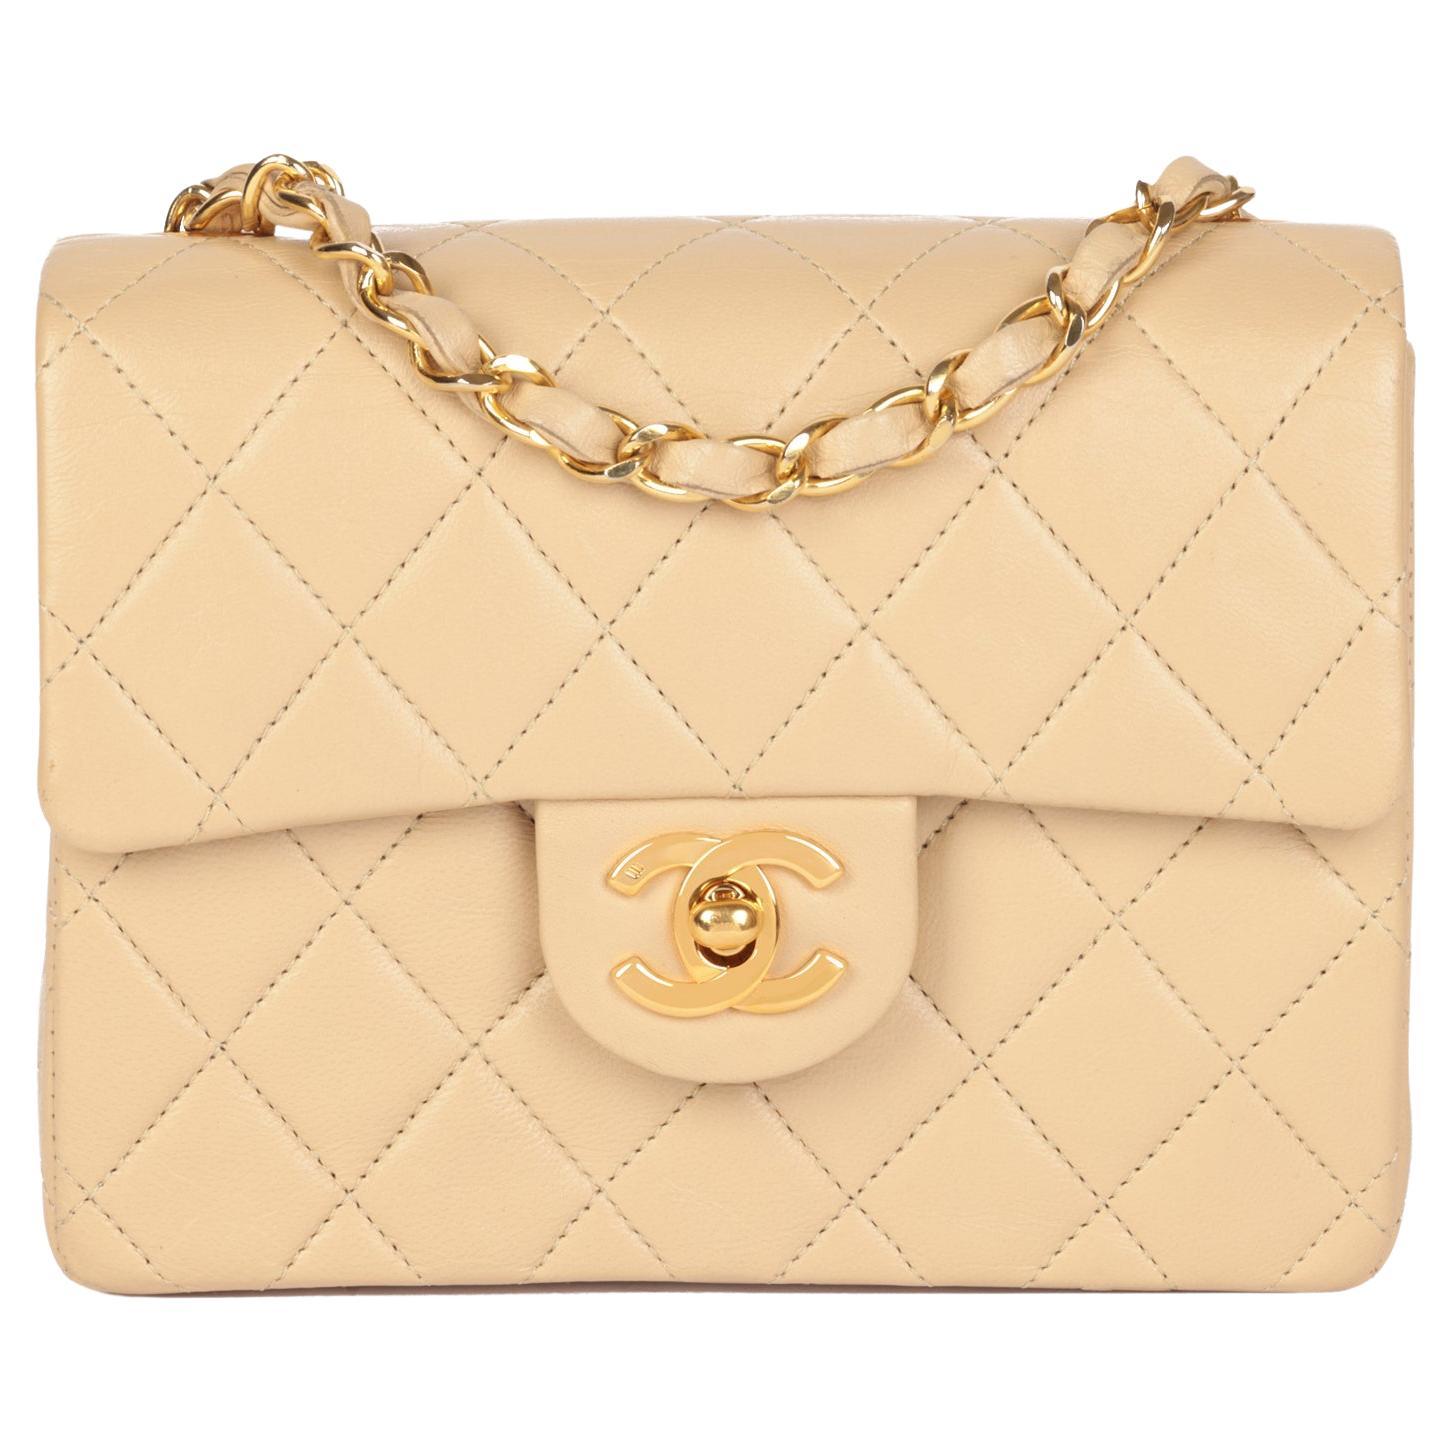 chanel white small bag new